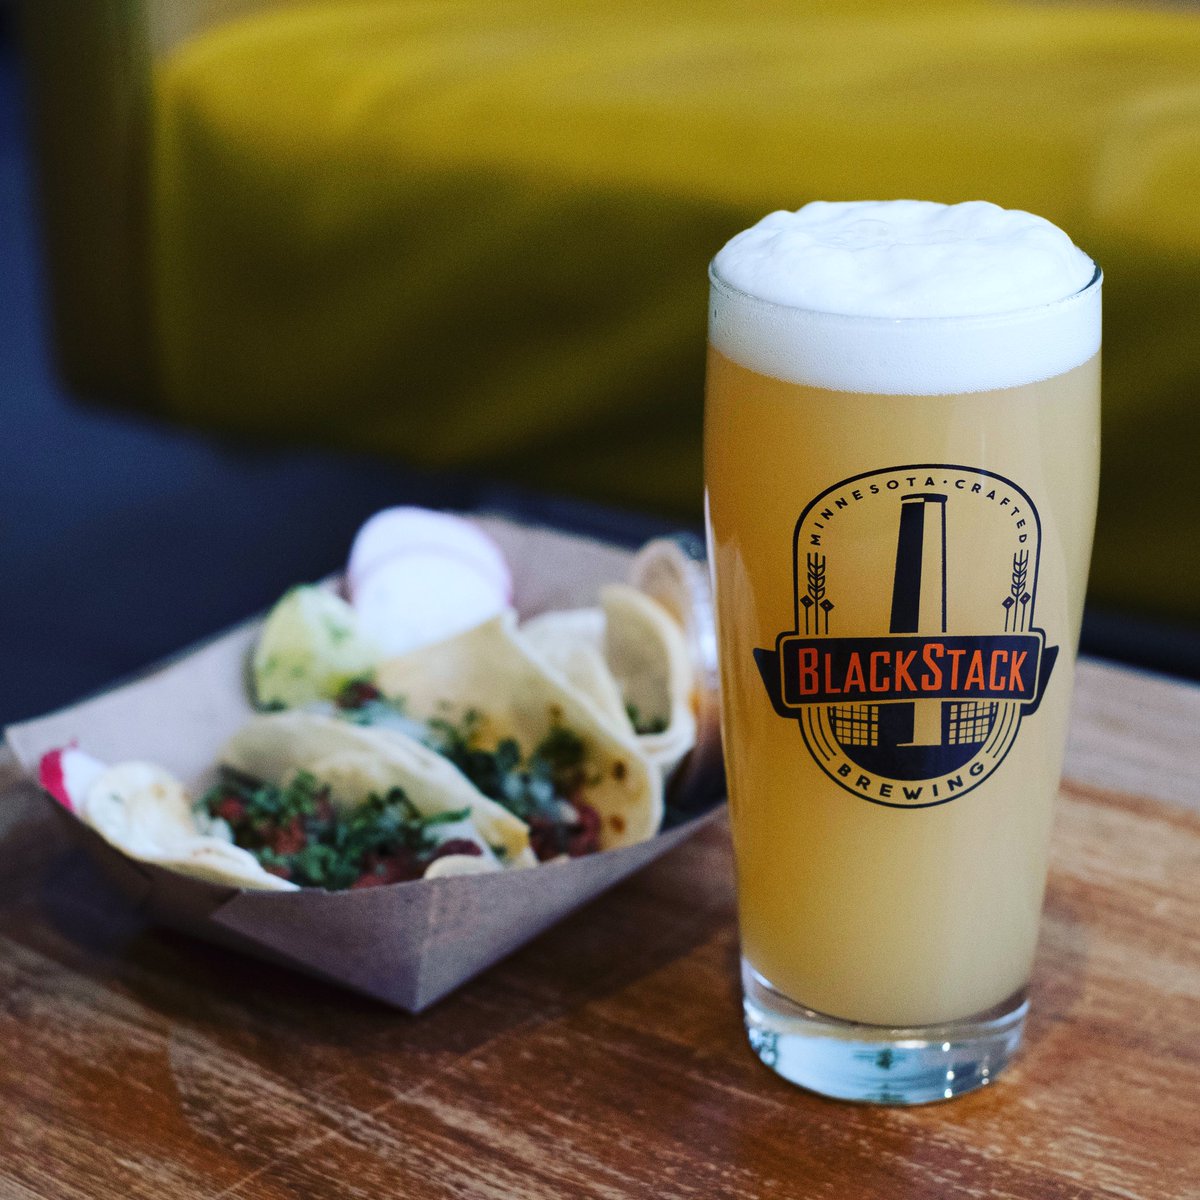 Our buds @los_ocampo are back slingin’ Tacos every Tuesday🙏🙏🙏 3 Pork, Chicken, Beef or Veggie Tacos & a Beer or Non-Alcoholic Beverage of your choice for $12🌮🍺 Grab one for yourself or get a bonus brew or two while you’re picking up dinner for the fam🤫🤫